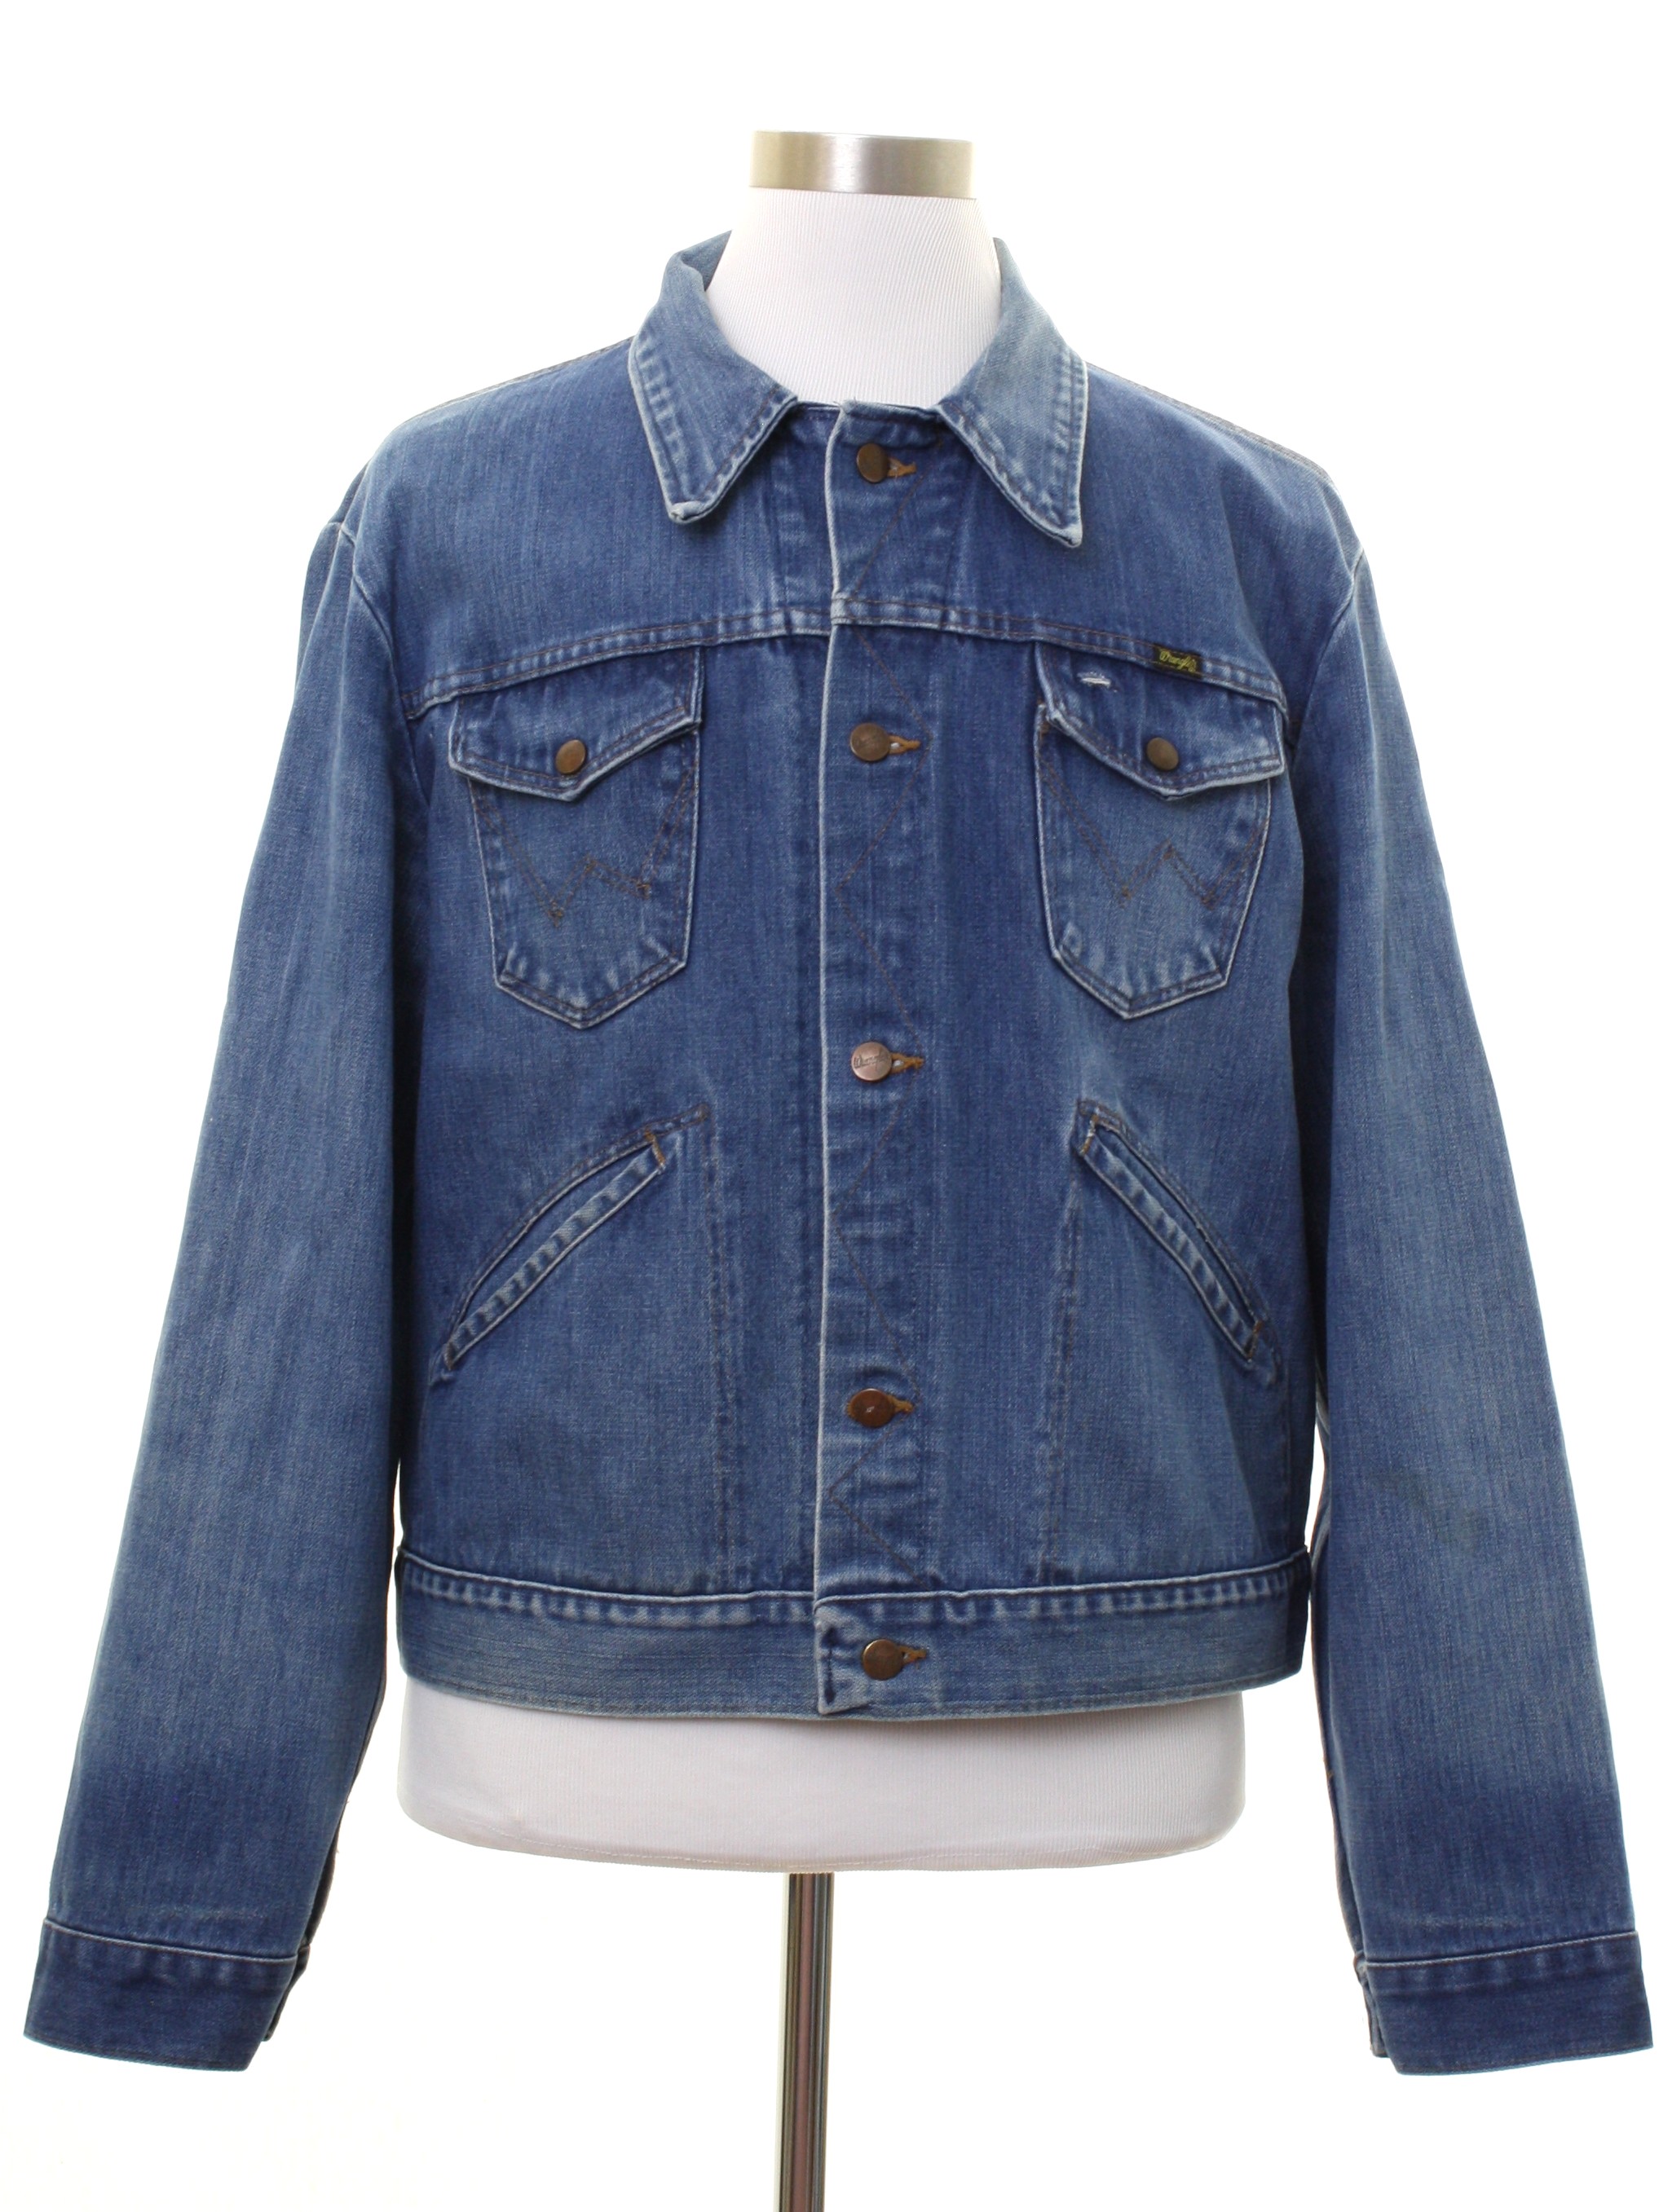 Wrangler 126MJ 70's Vintage Jacket: 70s -Wrangler 126MJ- Mens hazy blue  background cotton snap cuff longsleeve button front western denim jacket.  Classic jeans style jacket with front and back yoke, lower angled